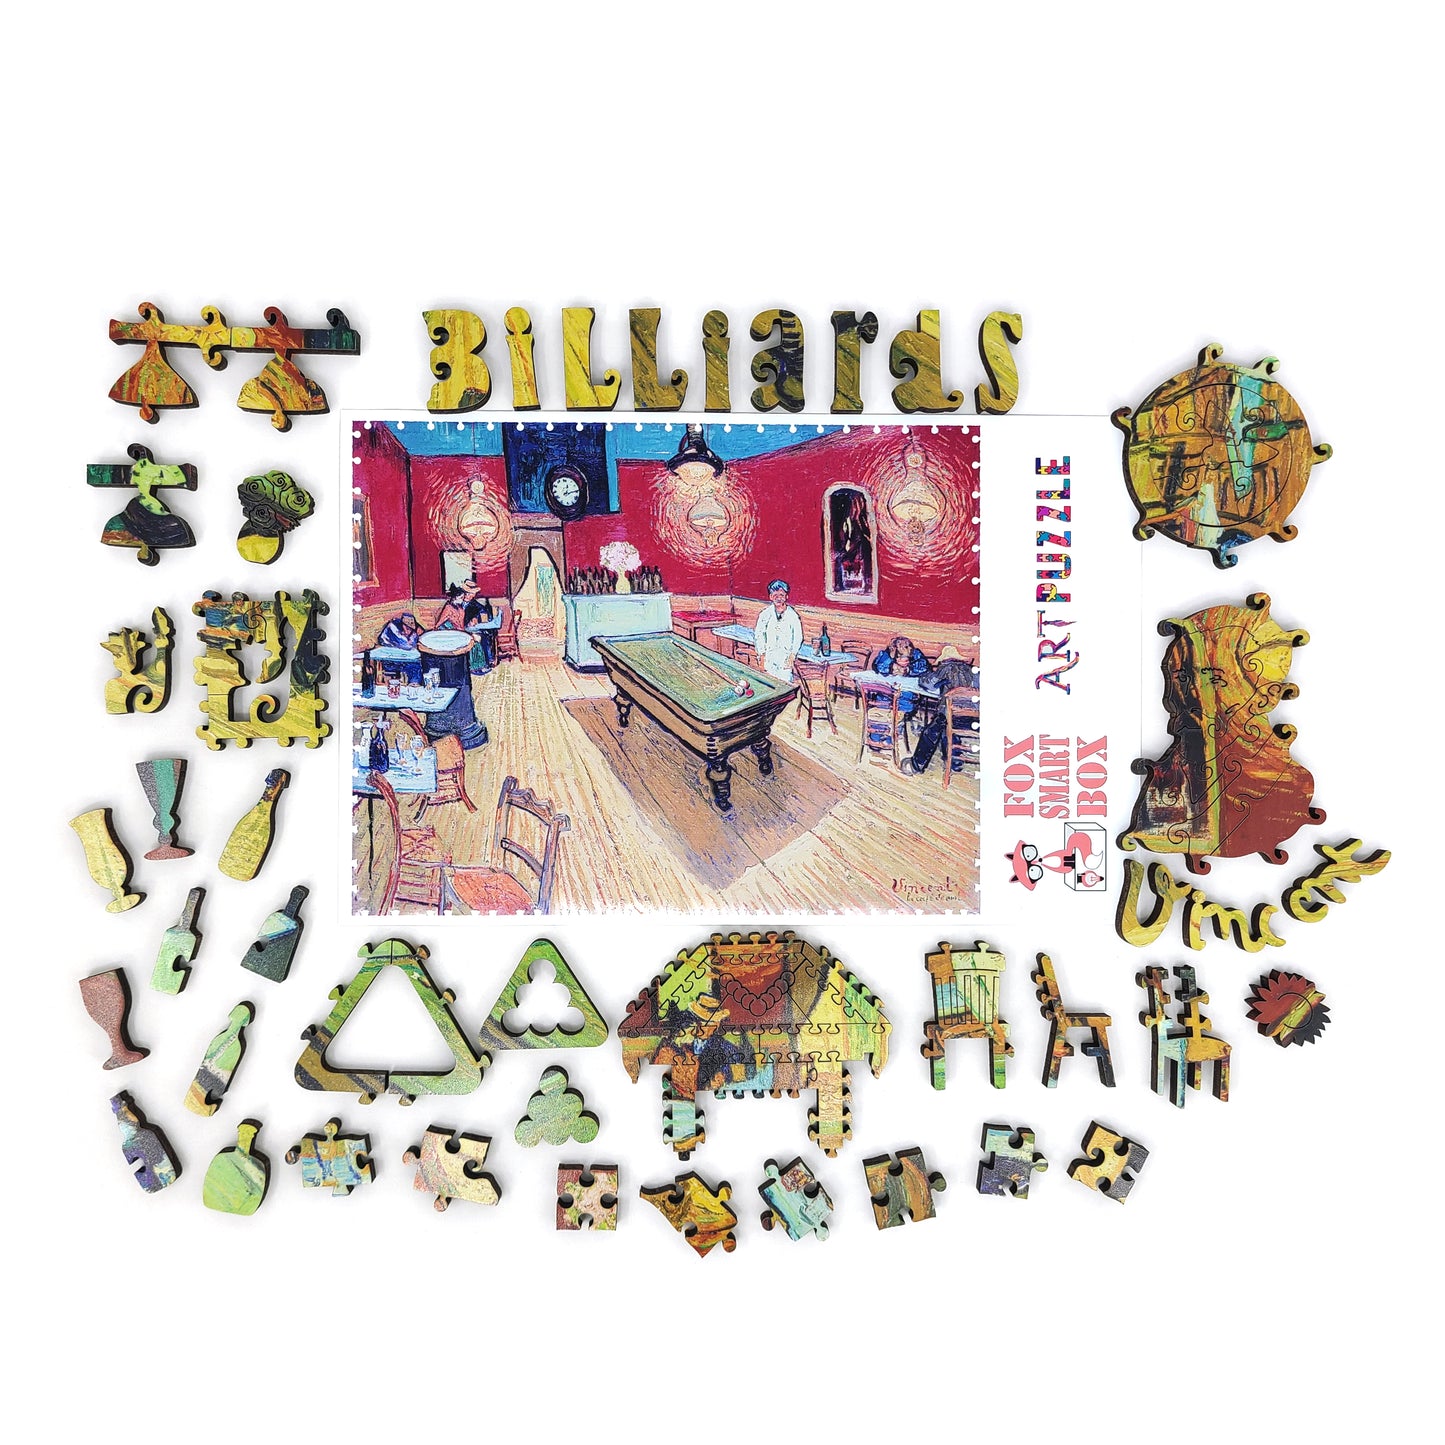 Wooden Jigsaw Puzzle with Uniquely Shaped Pieces for Adults - 330 Pieces - The Night Café